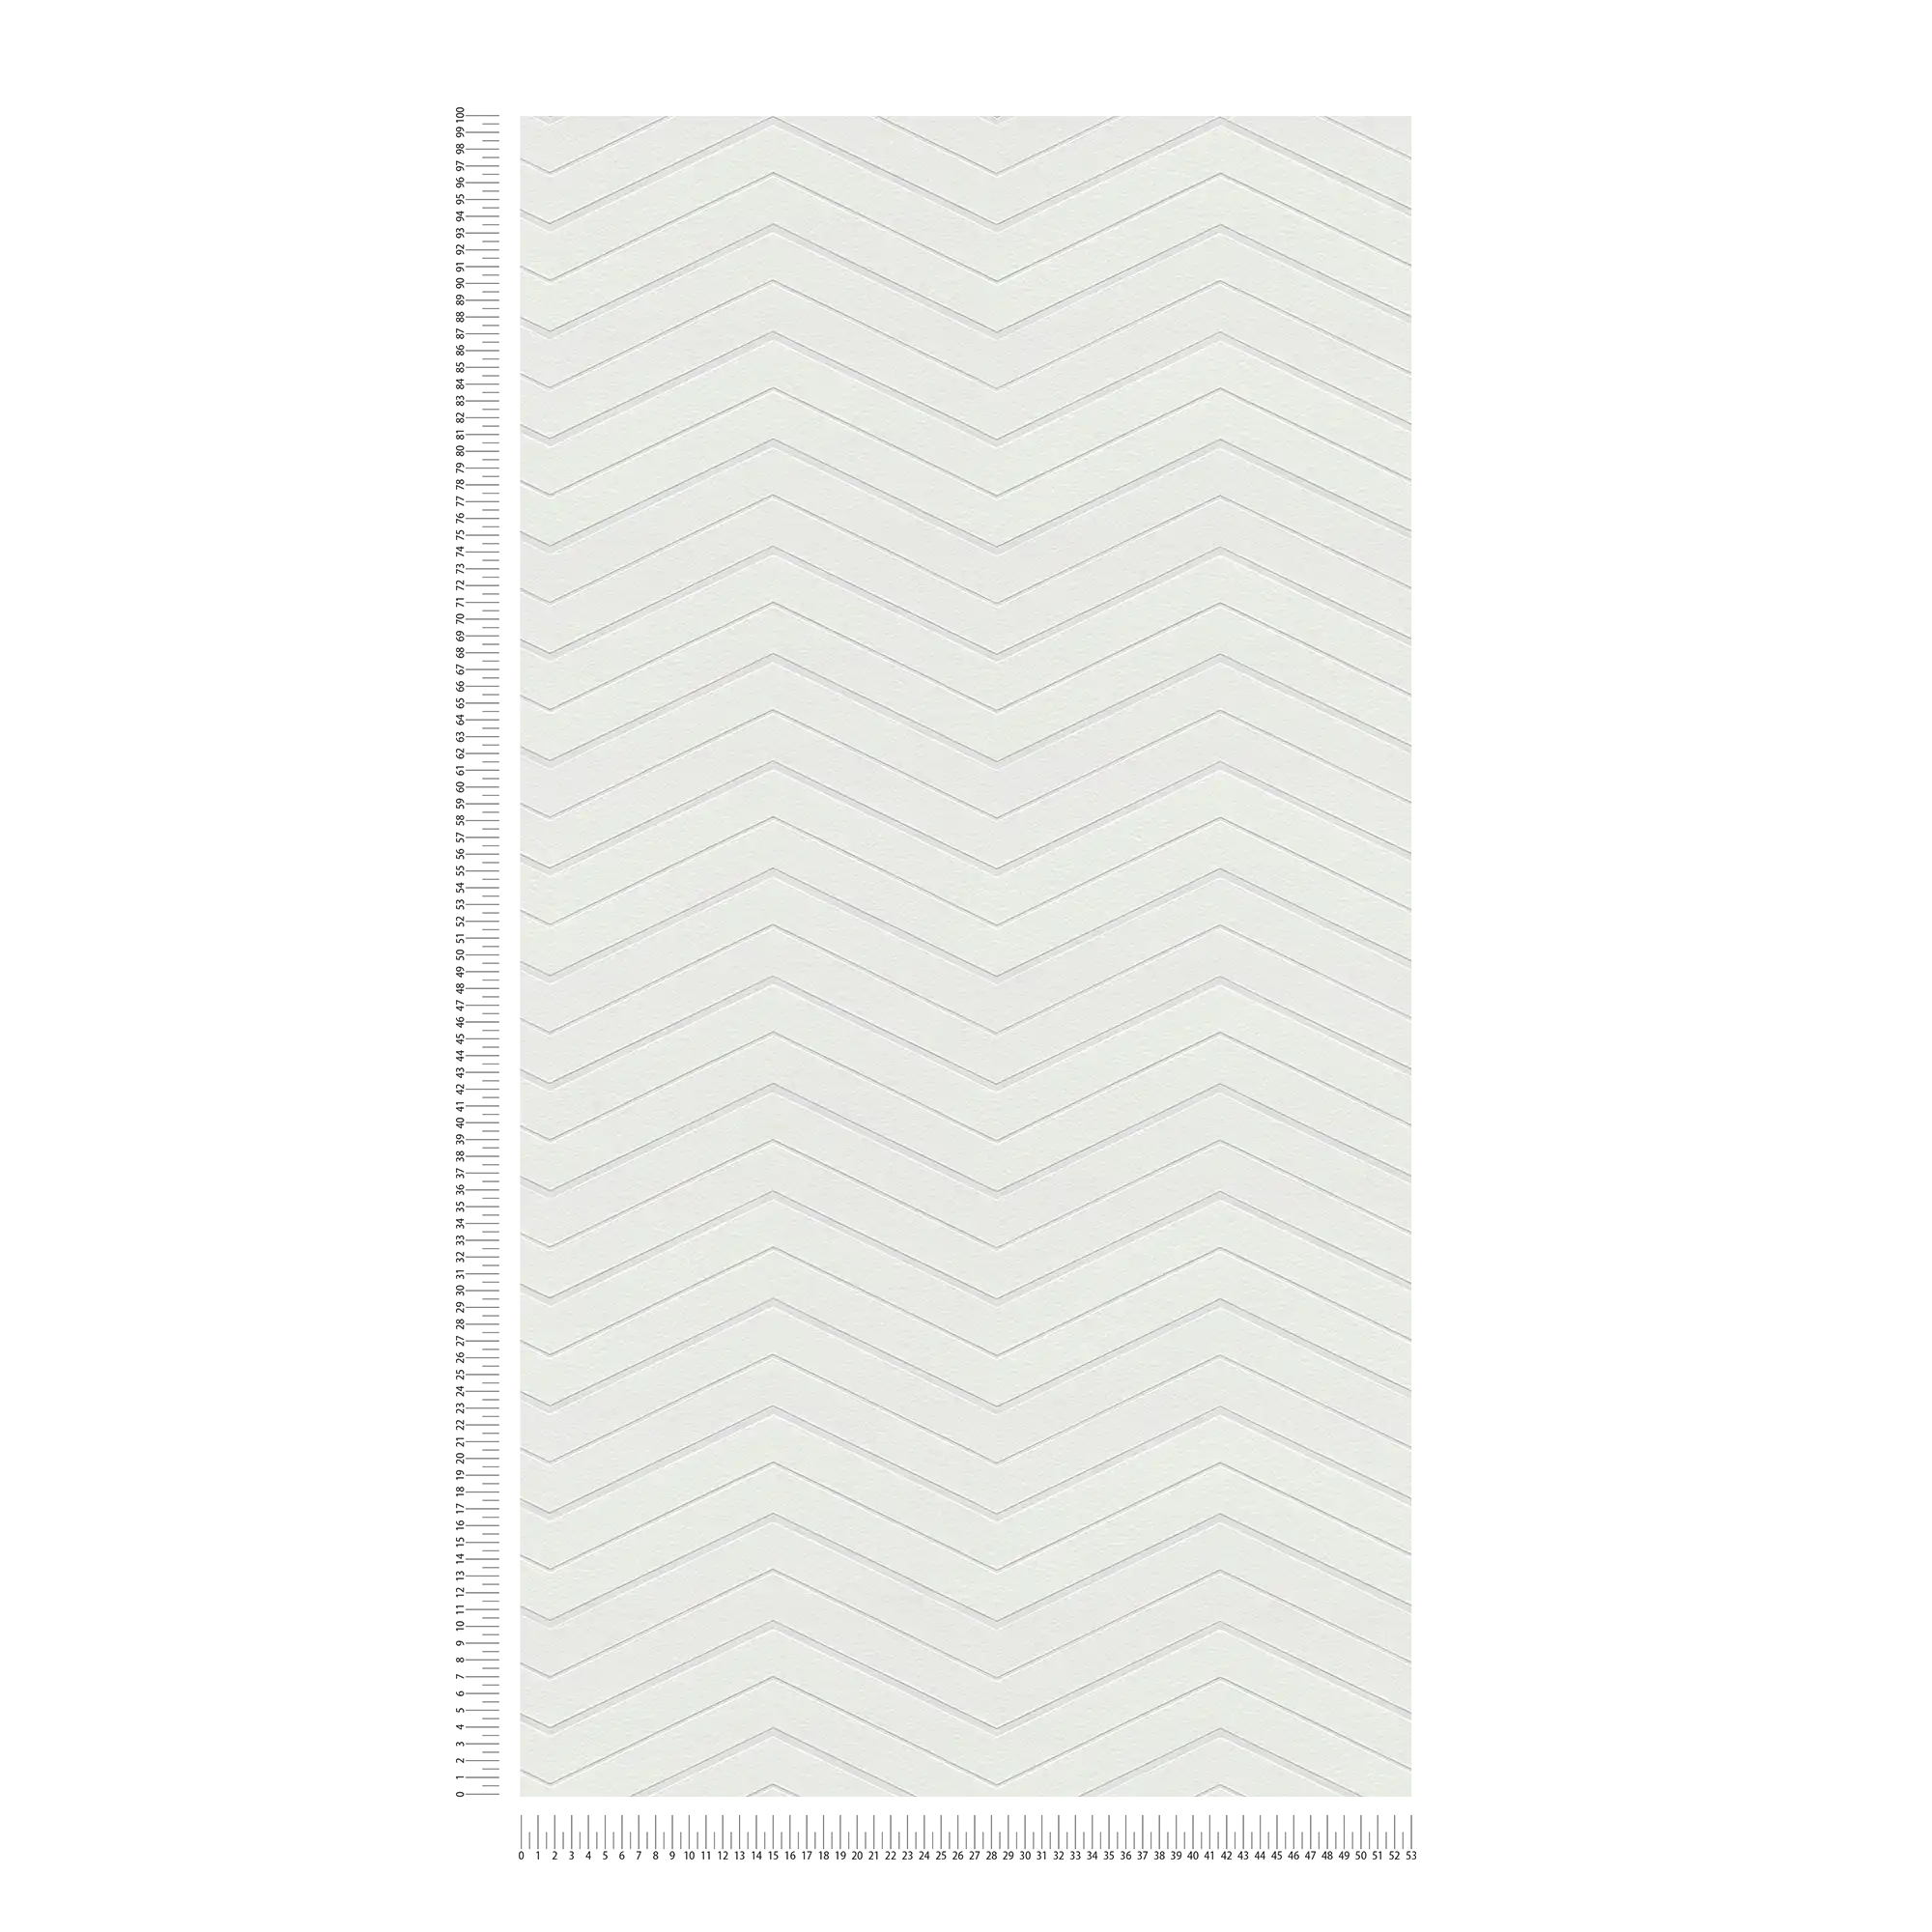             Graphic wallpaper with zigzag pattern to paint over - Paintable
        